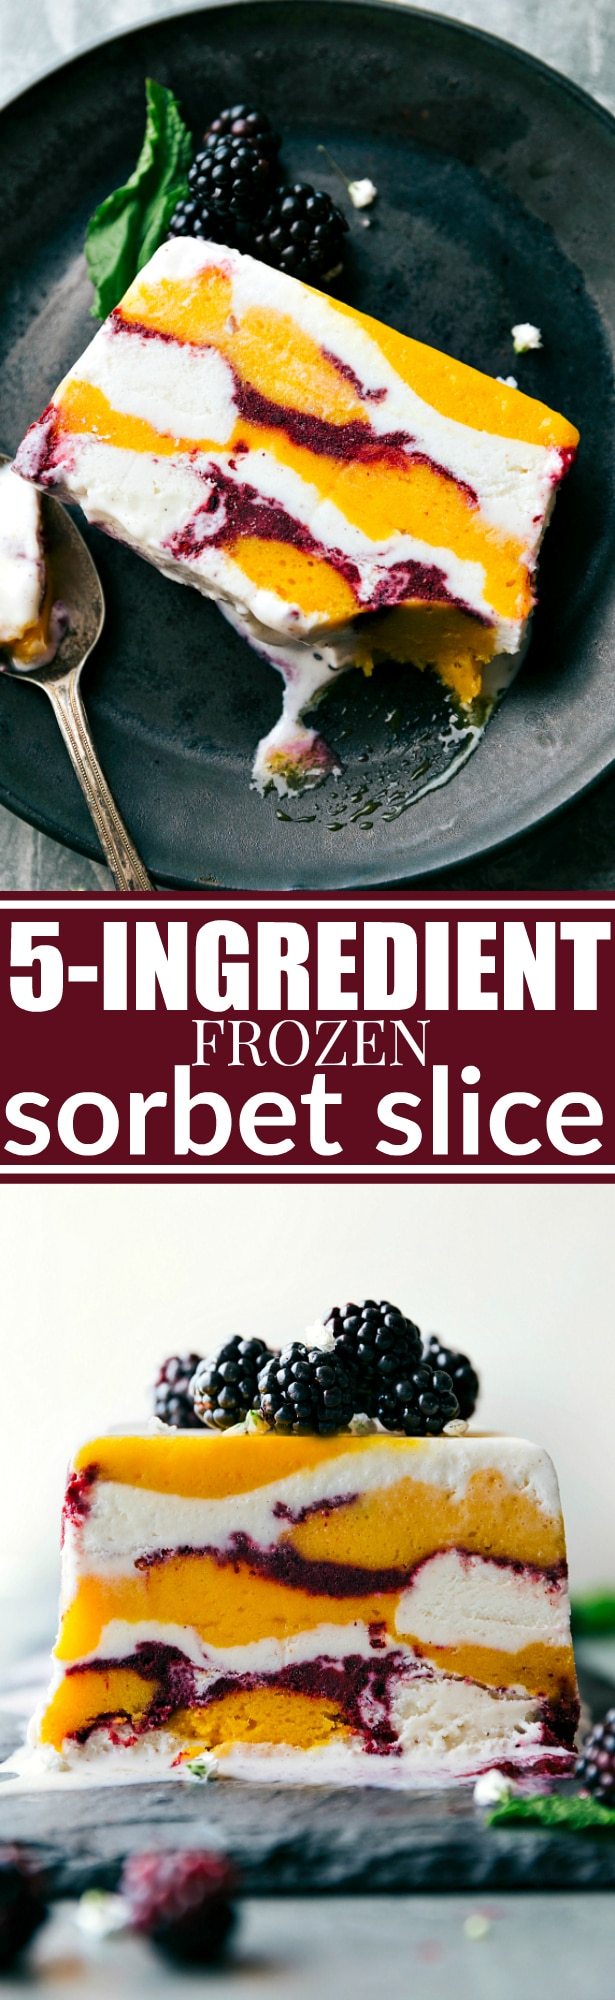 Only FIVE ingredients and a bread pan needed to make this impressive looking and beautiful dessert consisting of sorbet, frozen fruit, and vanilla bean ice cream. A show-stopping dessert that couldn't be easier to make! Via chelseasmessyapron.com